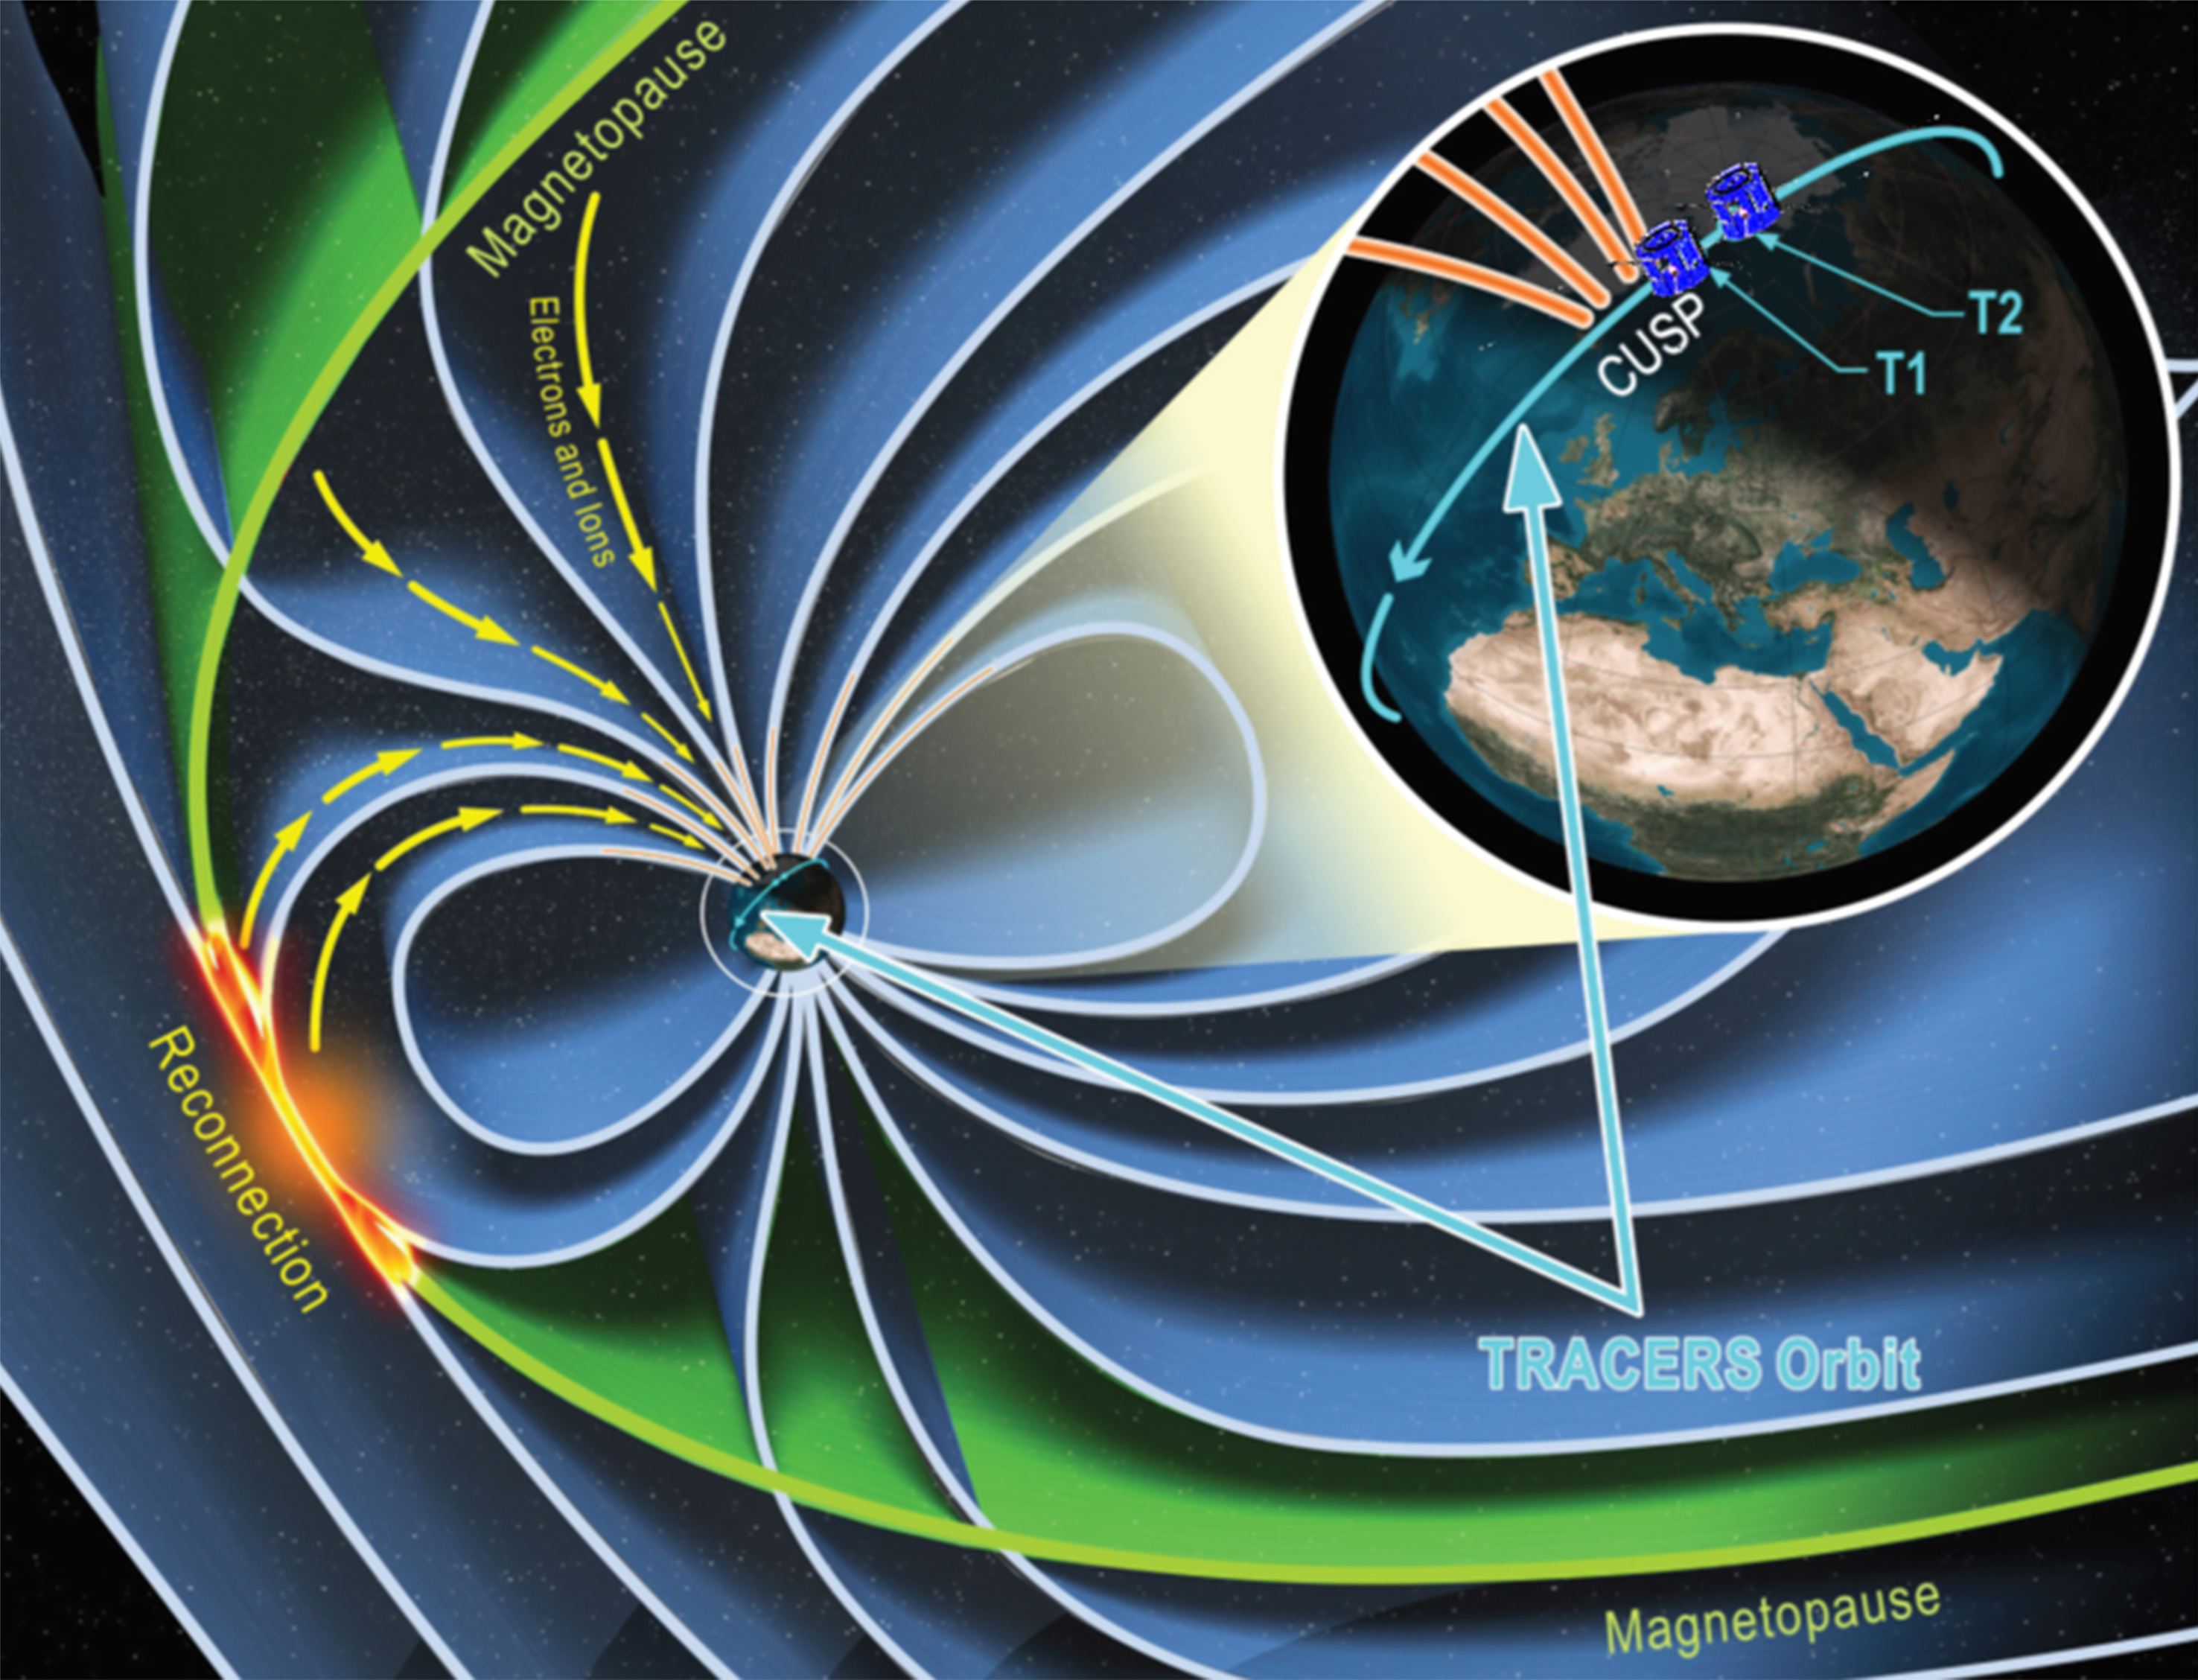 A graphic displaying the earth's magnetosphere with the approximate orbit of the TRACERS satellites shown. The magnetopause, reconnection, and the orbit are labeled.